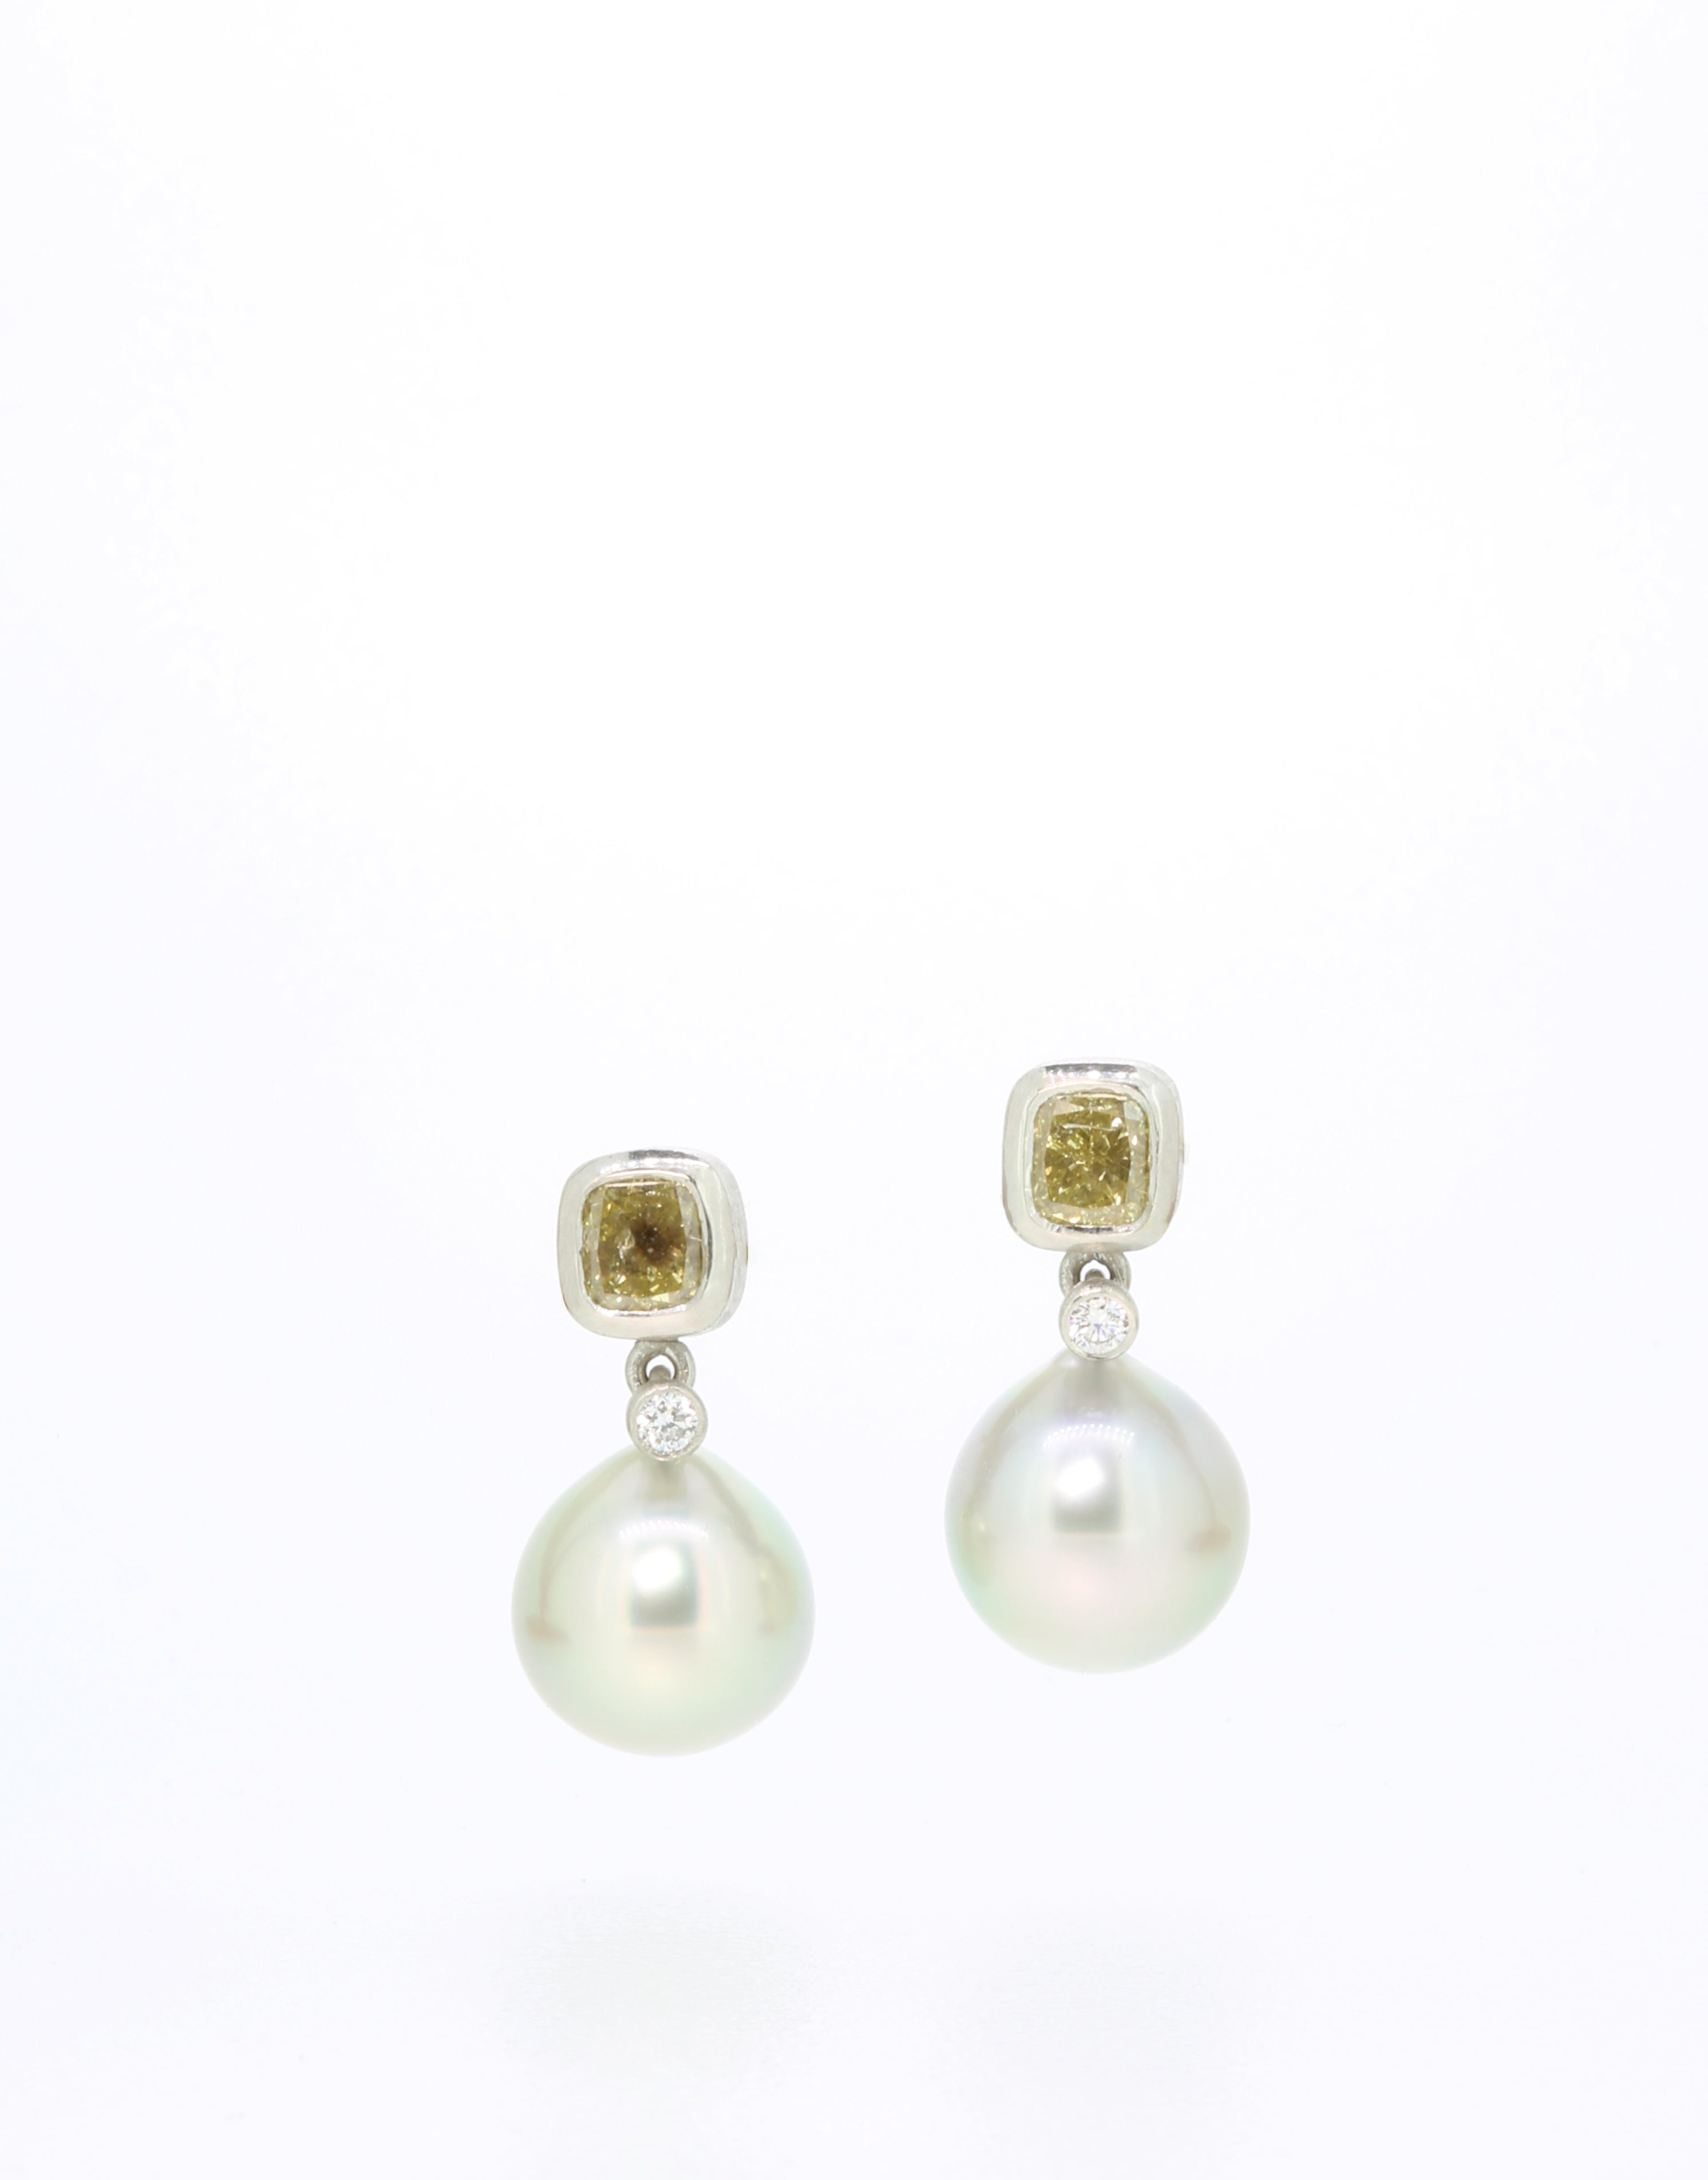 Platinum ear rings with yellow diamonds and light grey Tahitian pearls